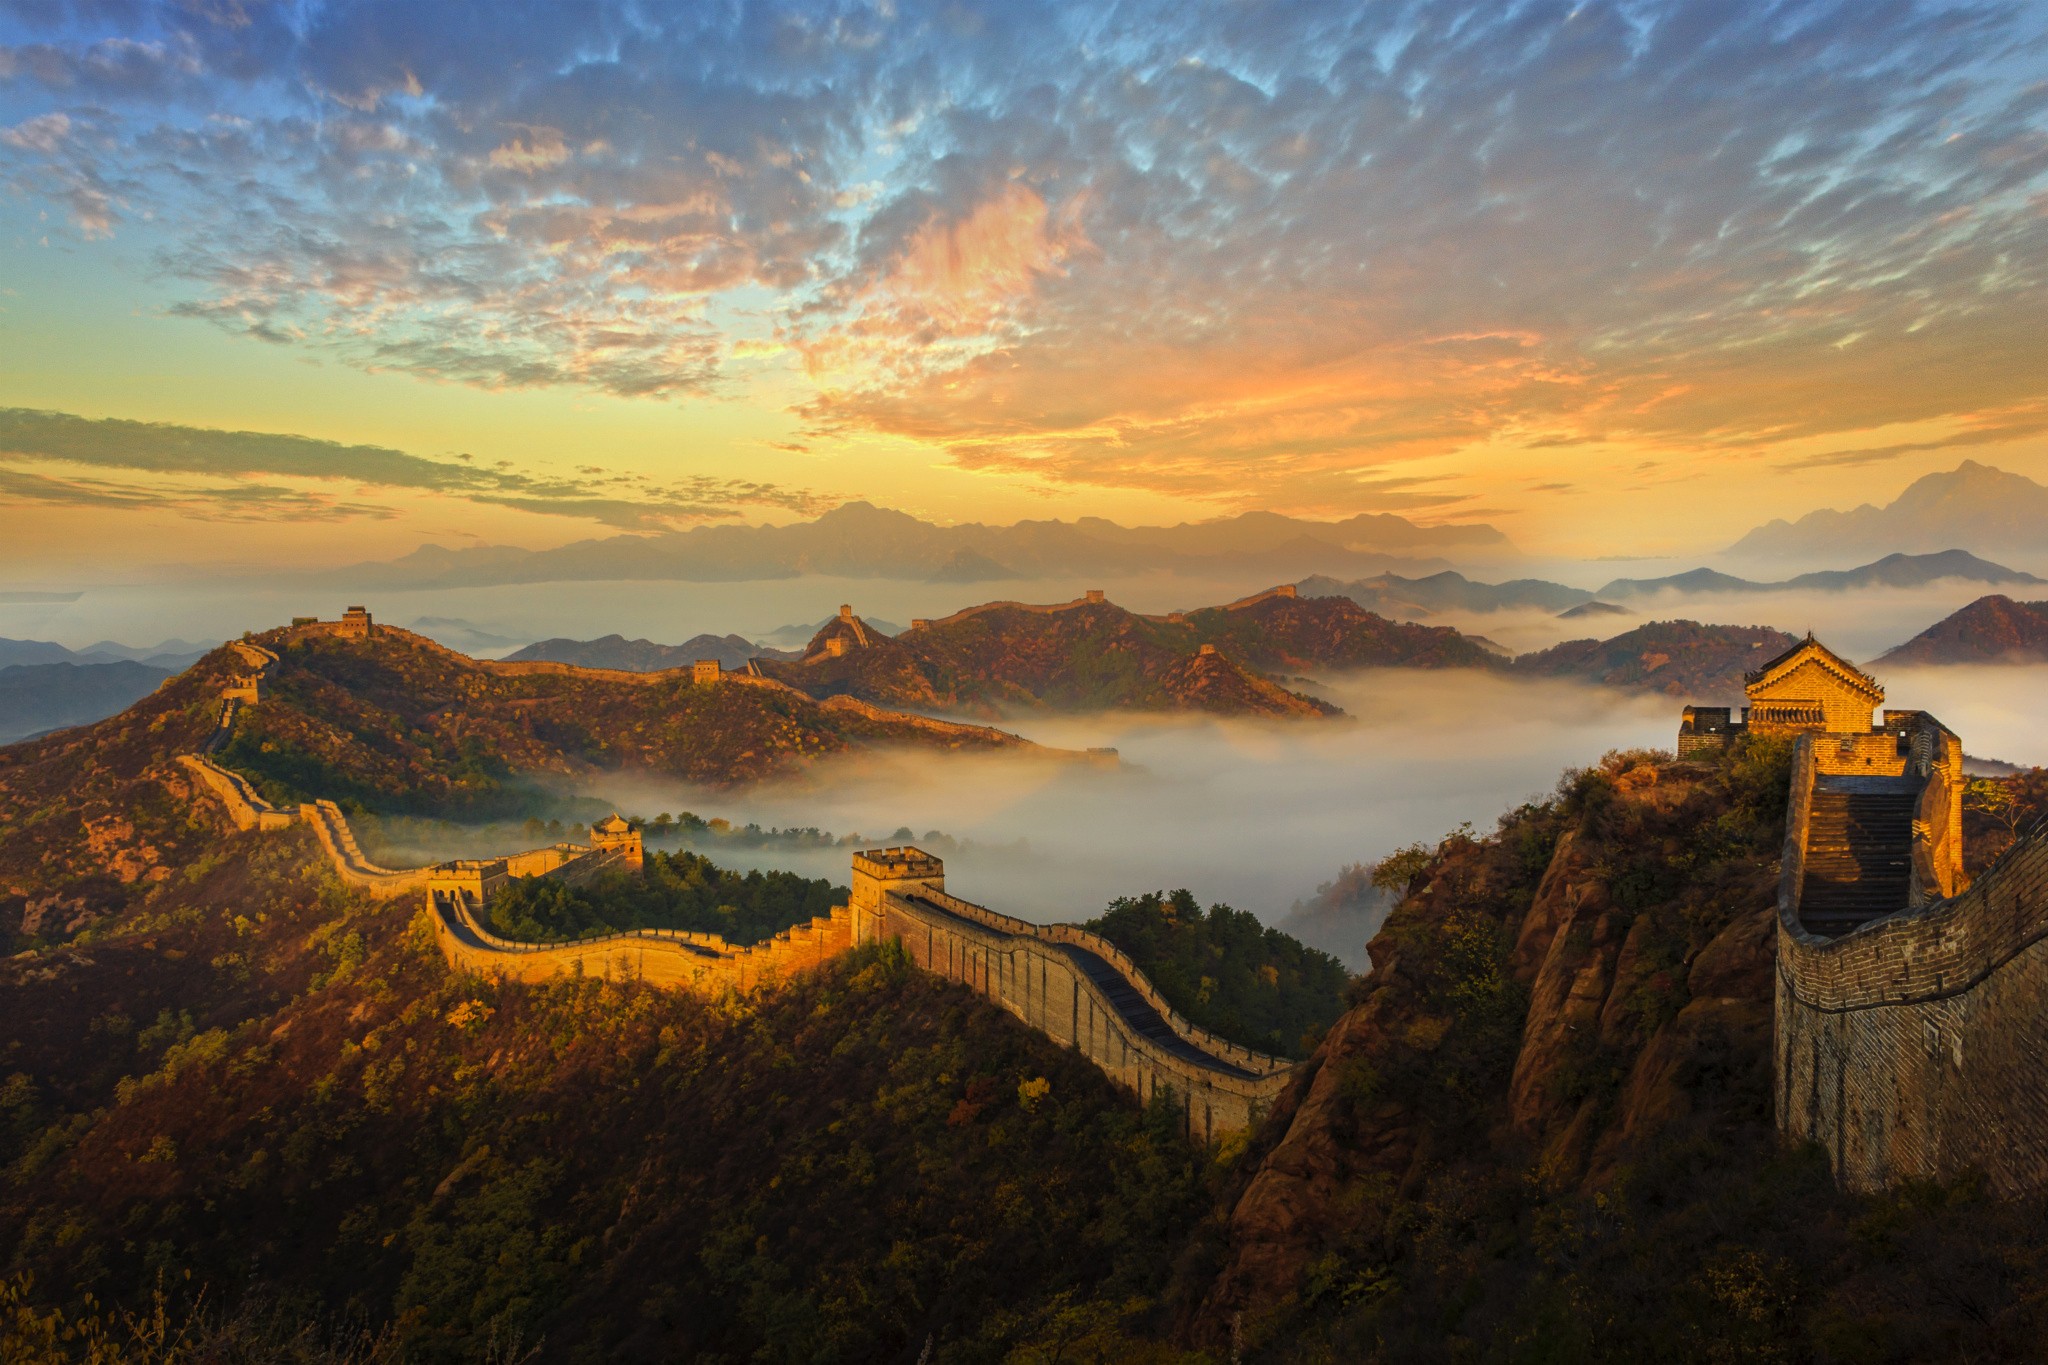 General 2048x1365 landscape Great Wall of China fort hills mountains old building China Asia sky clouds